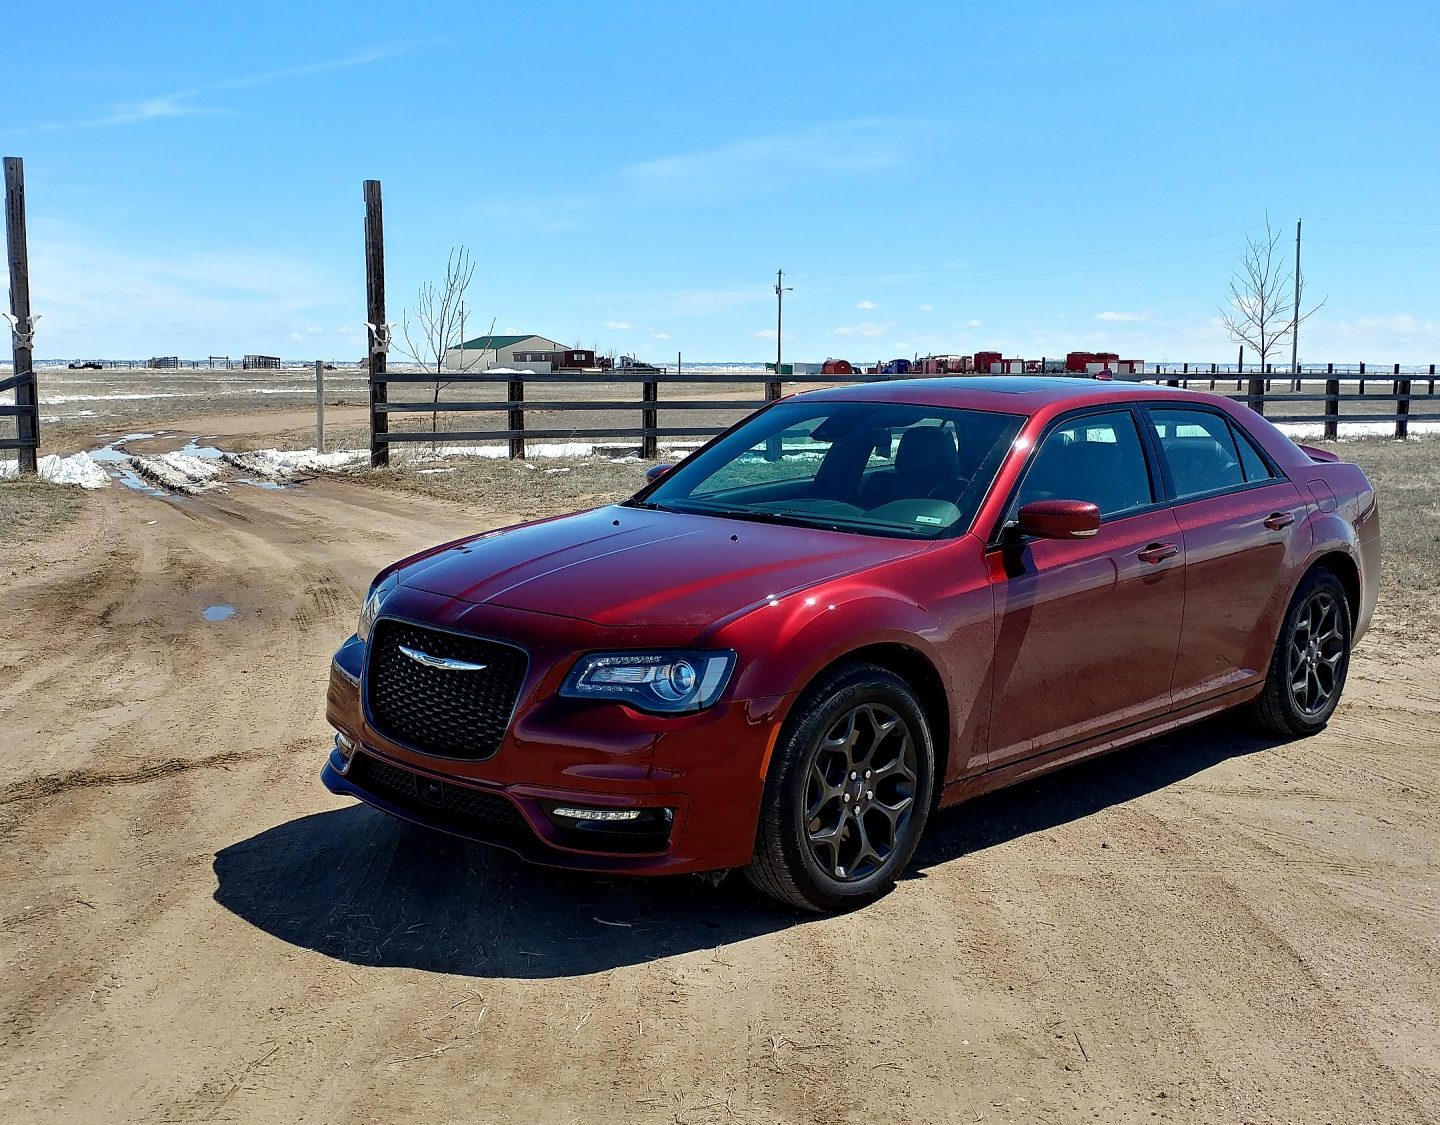 Video Review: 2019 Chrysler 300 Continues the Big American Sedan Goodness